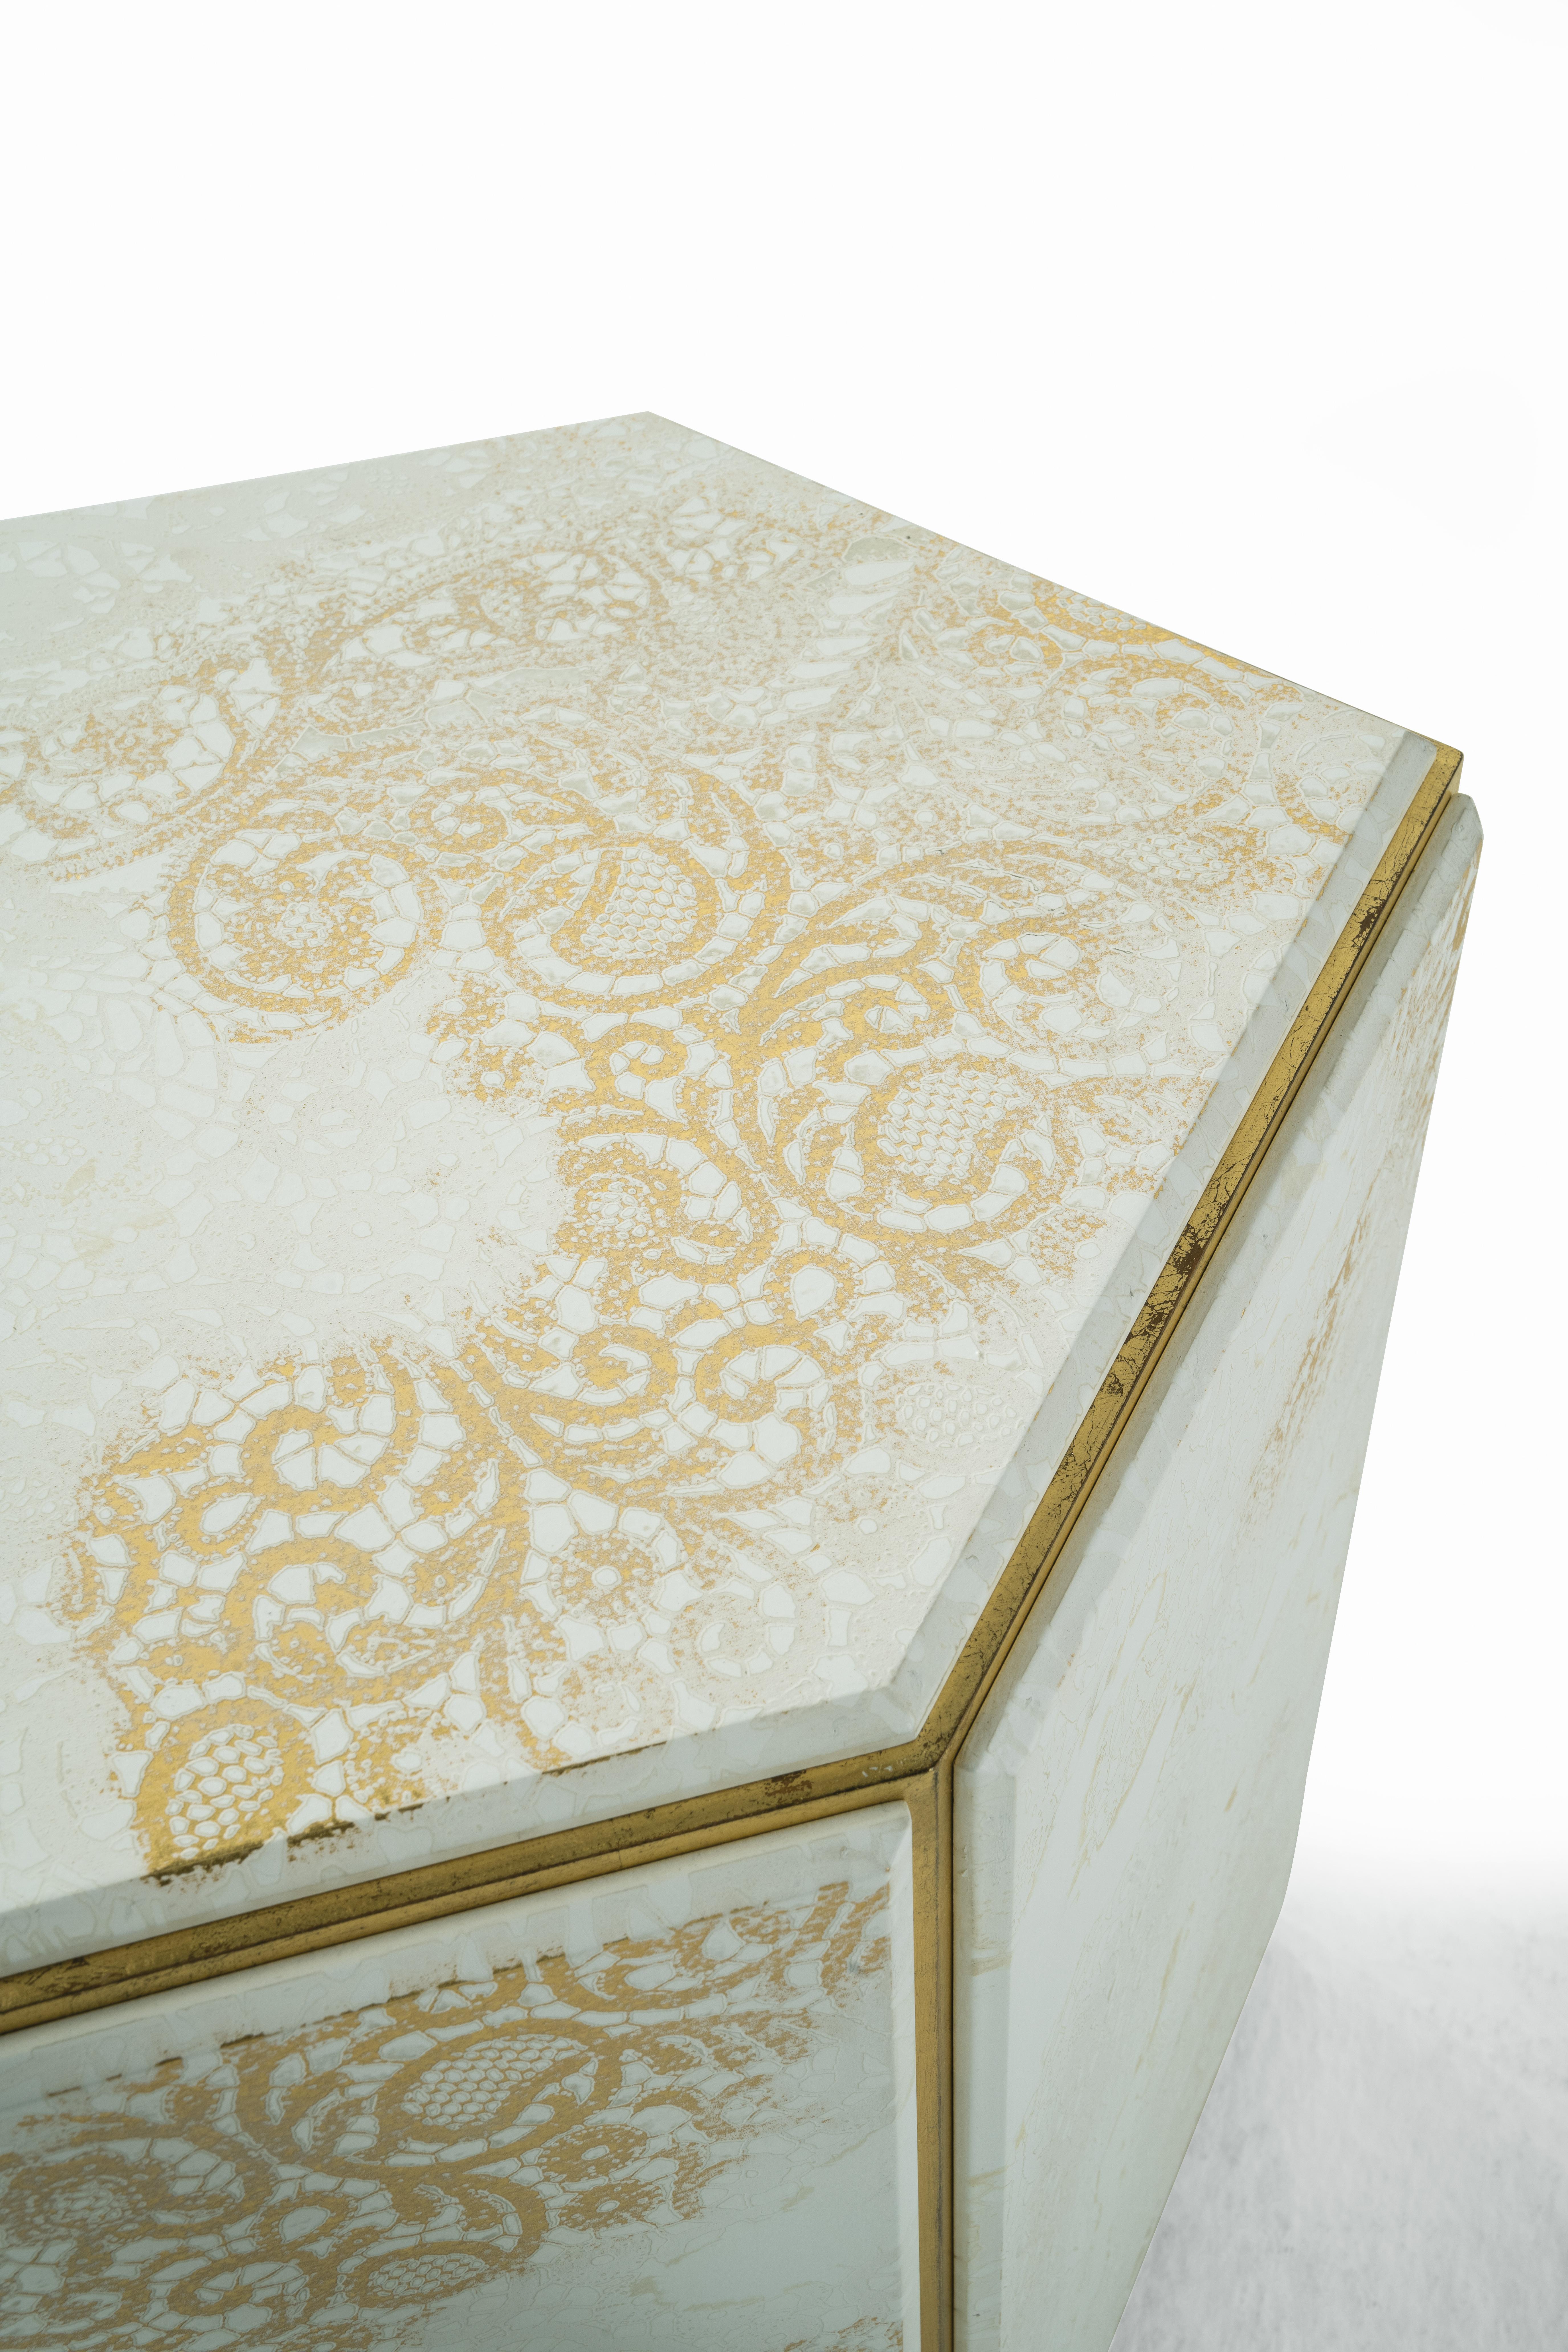 21st Century Très Jolie Low Table with Gold Leaf Laser Engraved Lace  In New Condition For Sale In Cantù, Lombardia